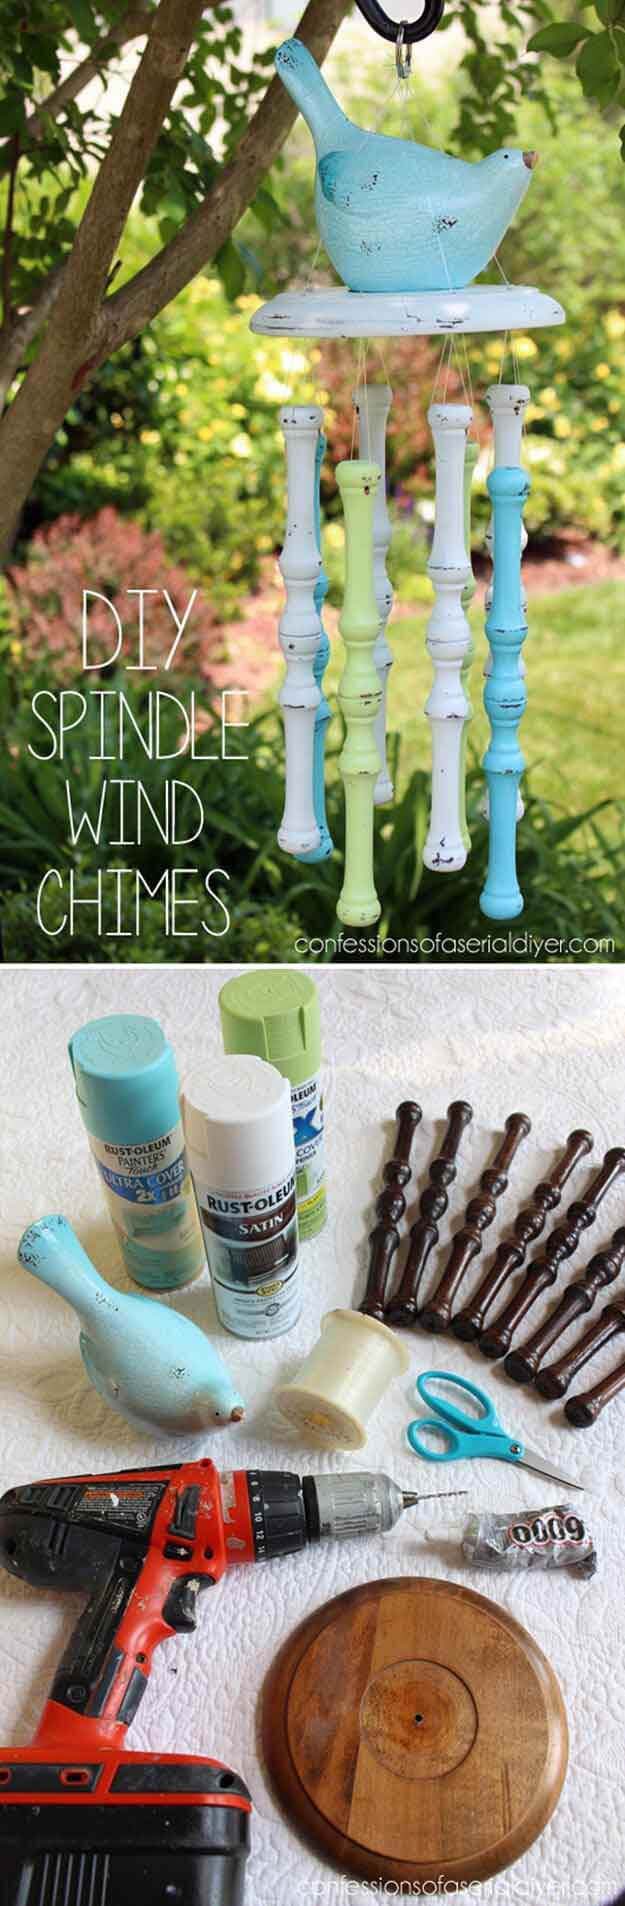 Whimsical Pastel Wooden Bird Wind Chimes #spindle #repurpose #decorhomeideas